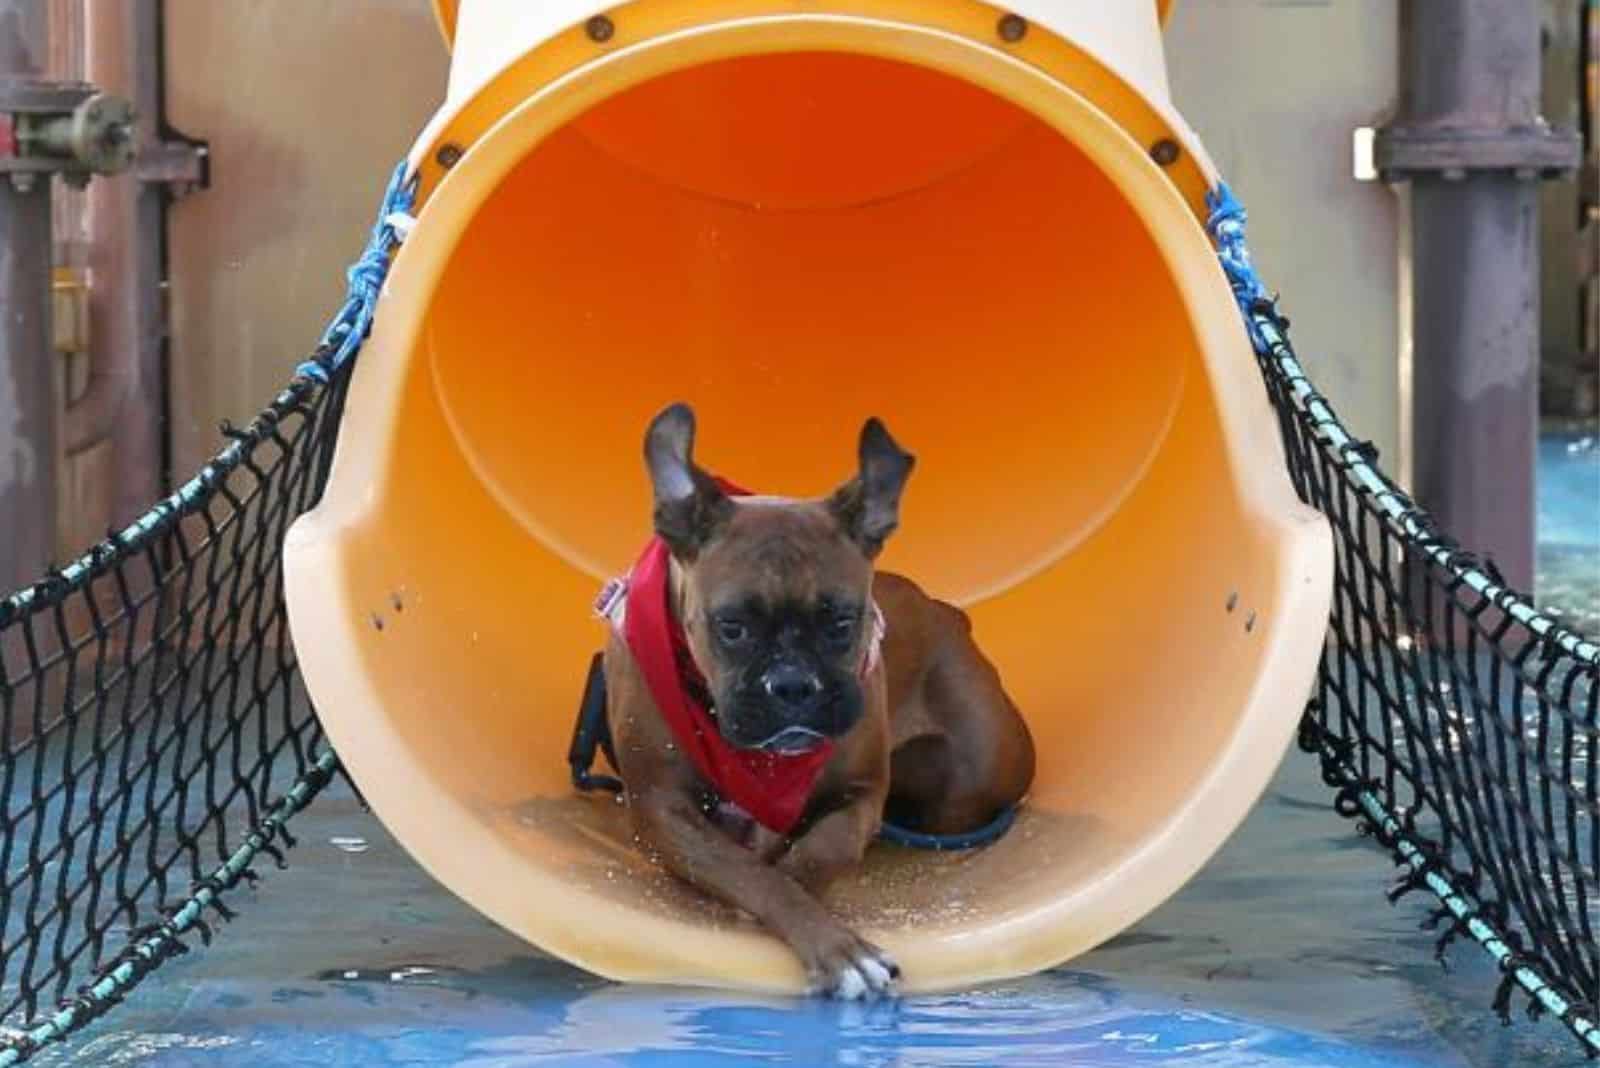 dog sliding down waterslide at pool party